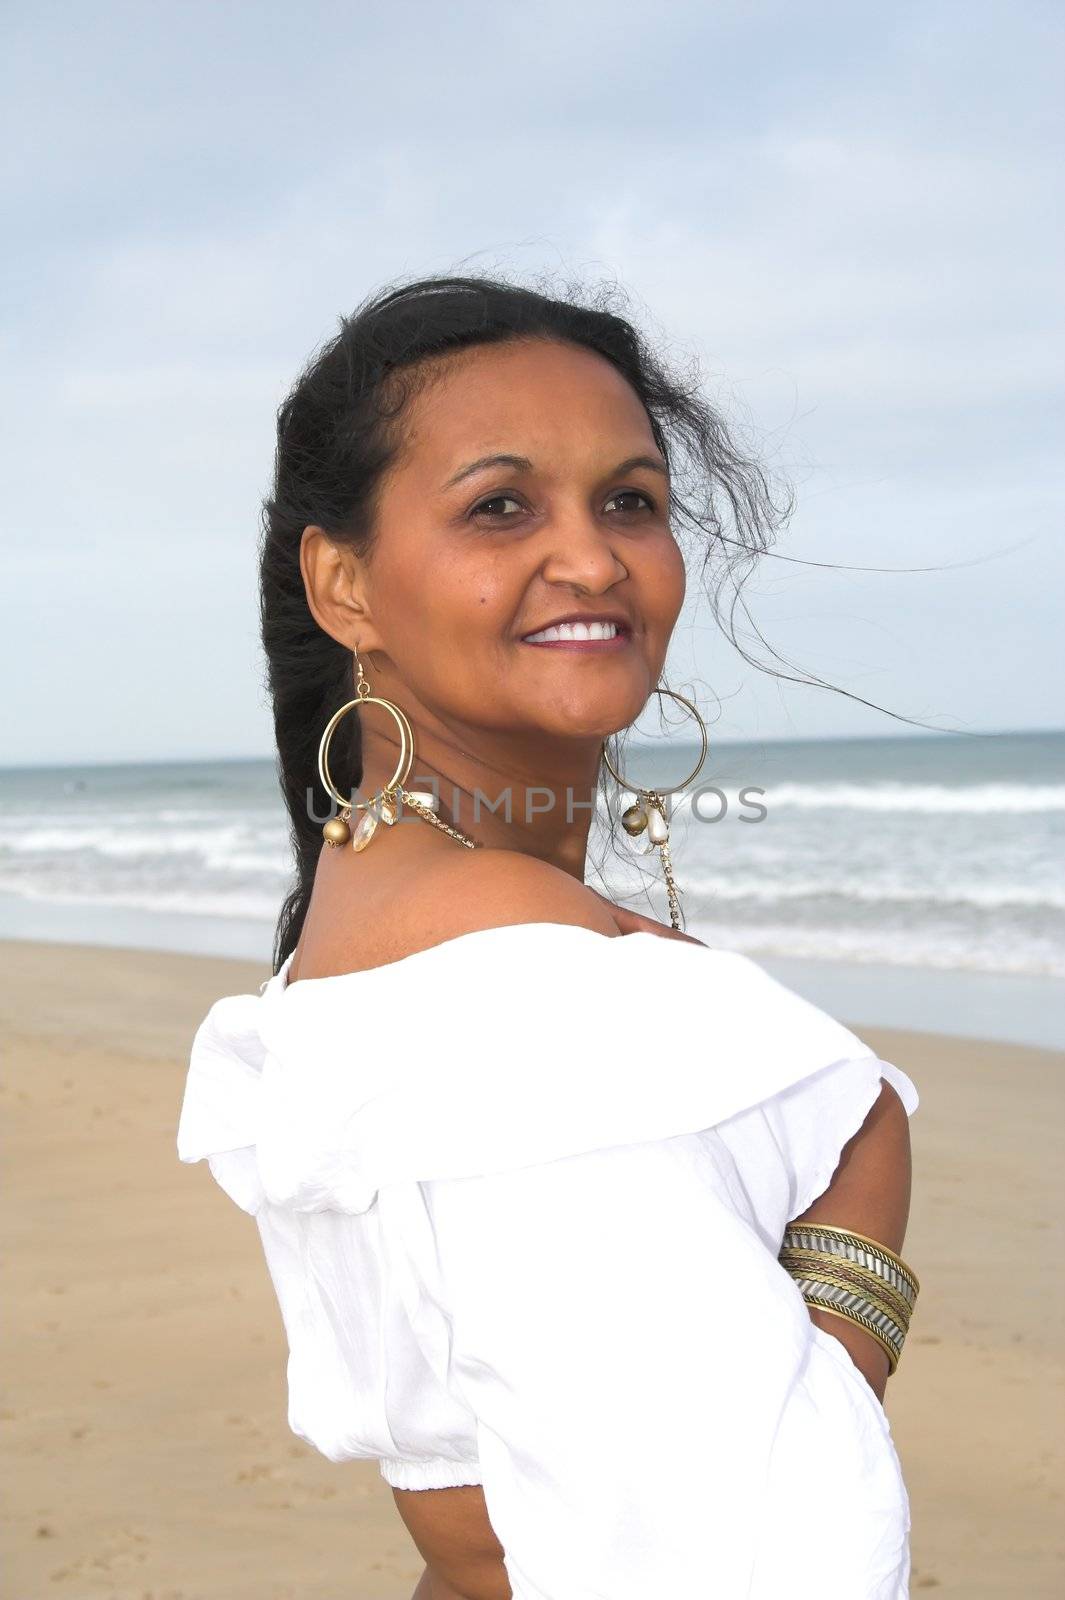 An Ethnic model posing at the beach